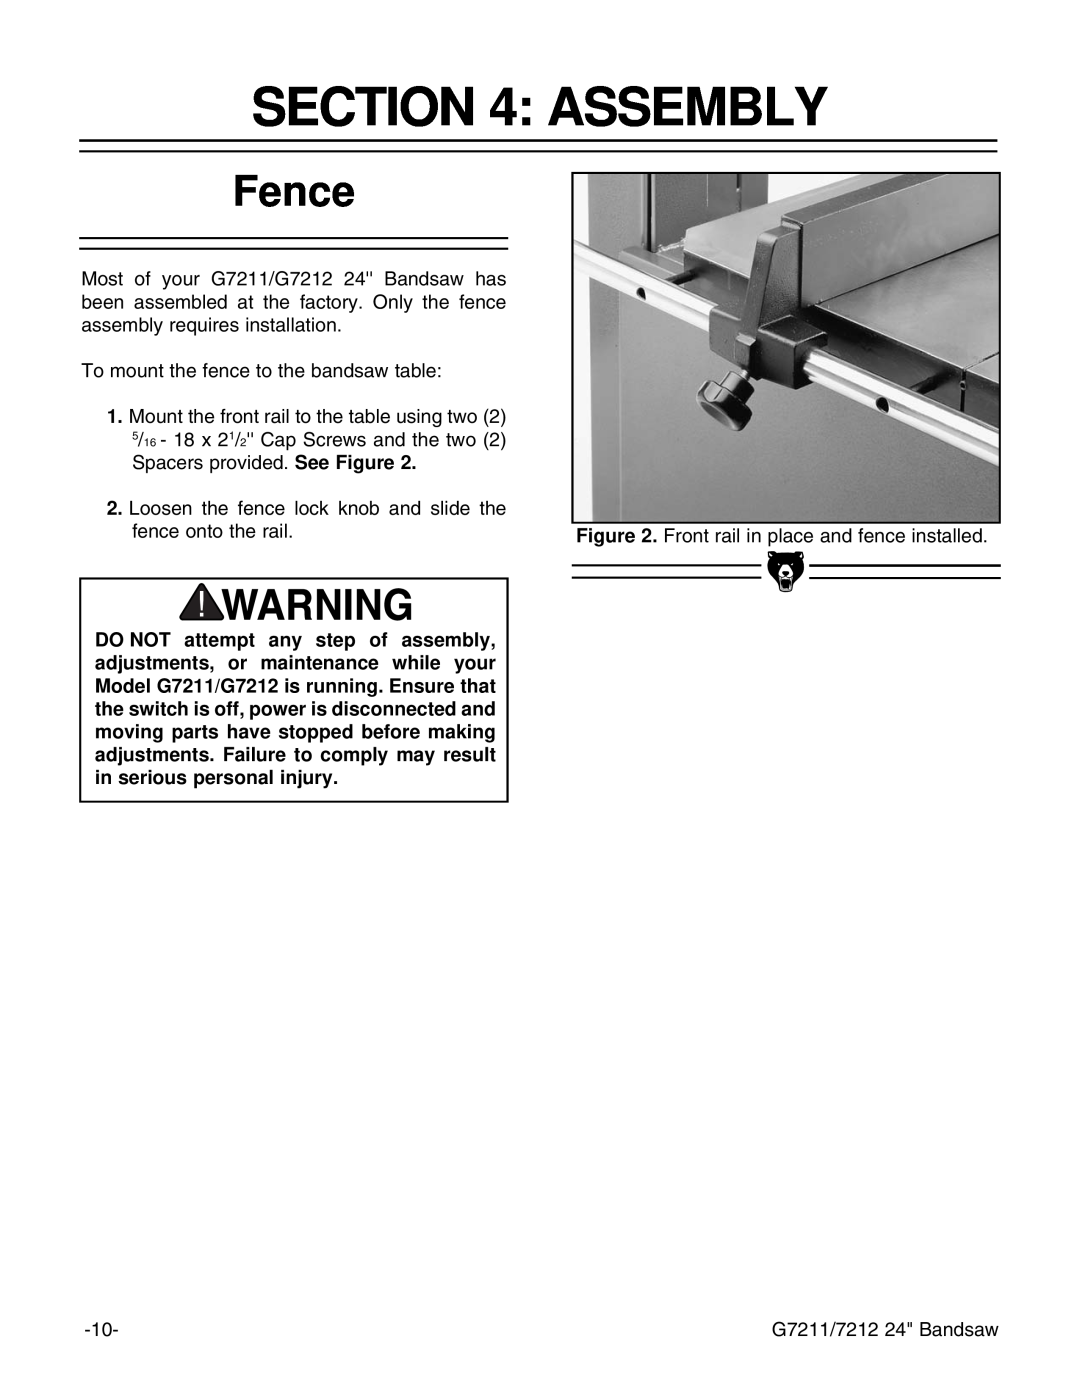 Grizzly G7212, G7211 instruction manual Assembly, Fence 